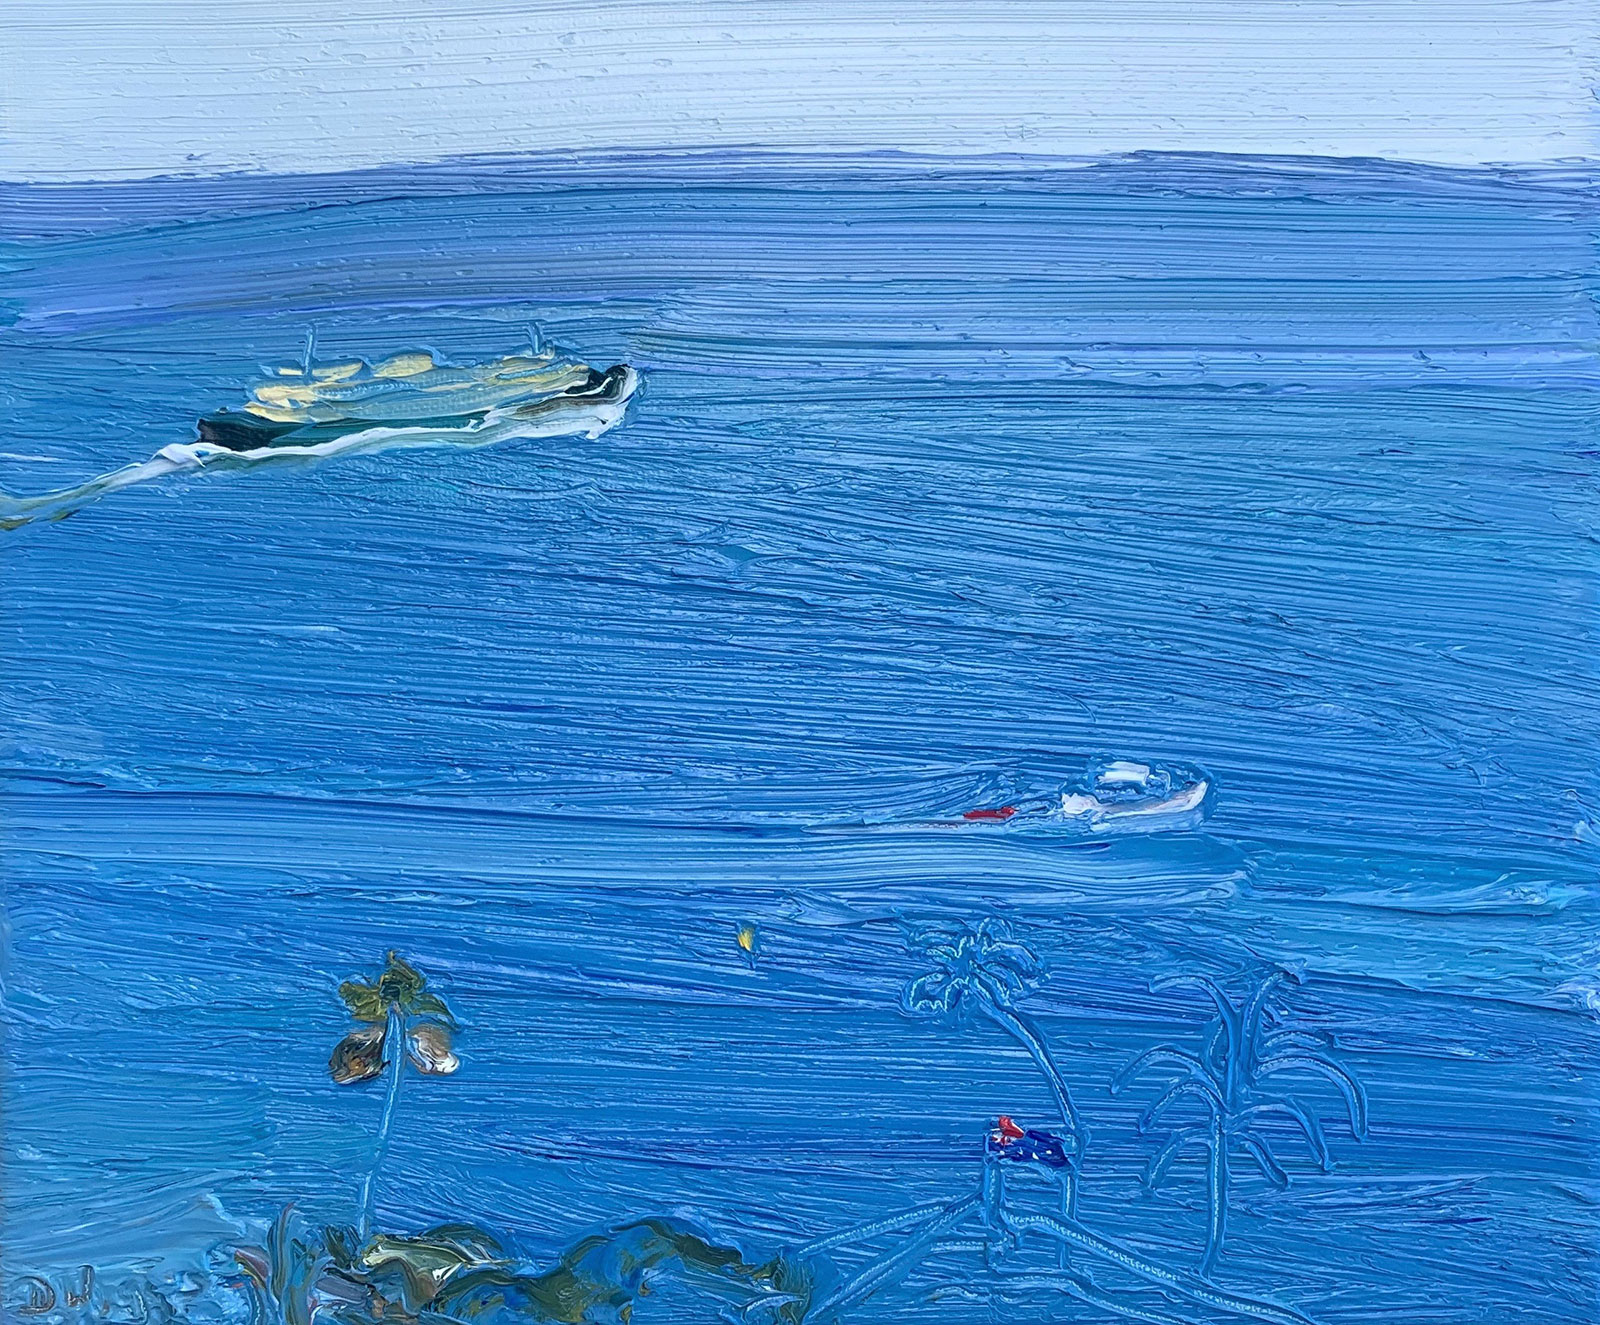 Past-The-Blue-Flag-and-the-Balmoral-swimming-club-Plein-air-Oil-on-canvas-25cm-x-30cm-David-K-Wiggs-2021